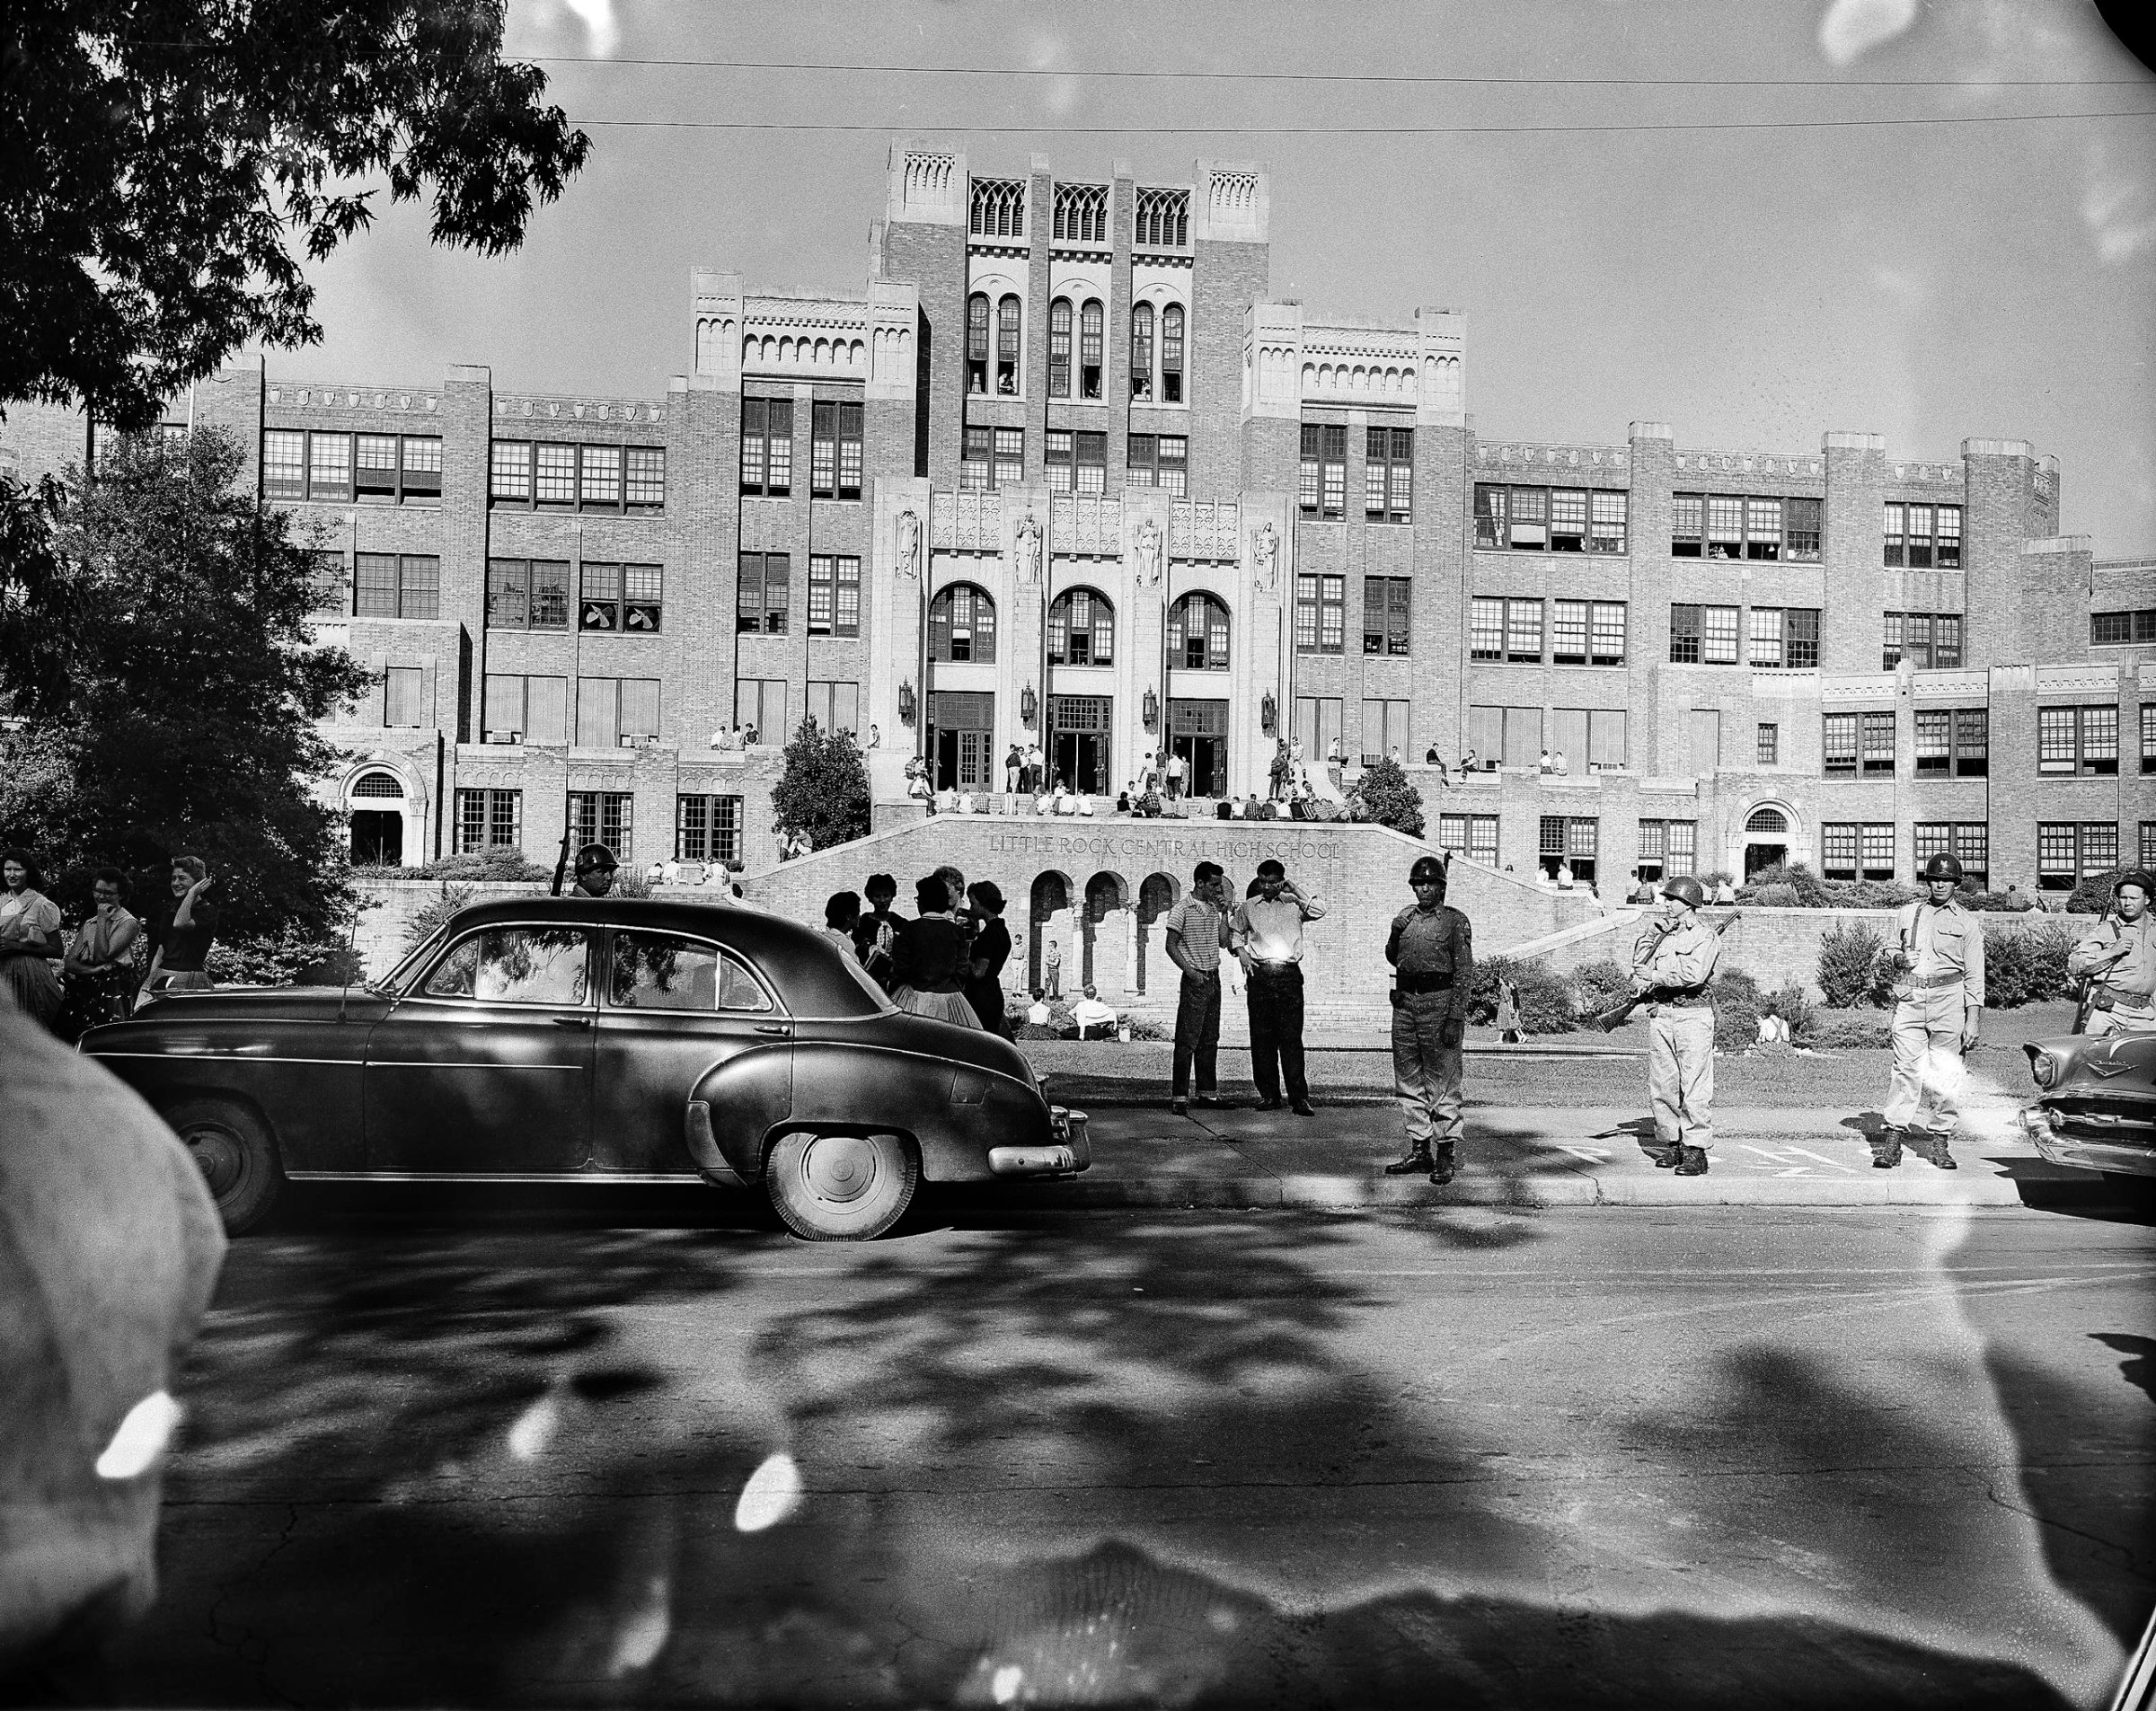 Only a small crowd of people gather in front of Little Rock Central High School the morning of Sept. 16, 1957. There were no incidents, with no black students trying to enter the school. Gov. Orval Faubus has kept guardsmen around the building for more than two weeks - ever since the day before school opened. He has not definitely indicated if and when the troops will be withdrawn. (AP Photo/Henry Griffin)